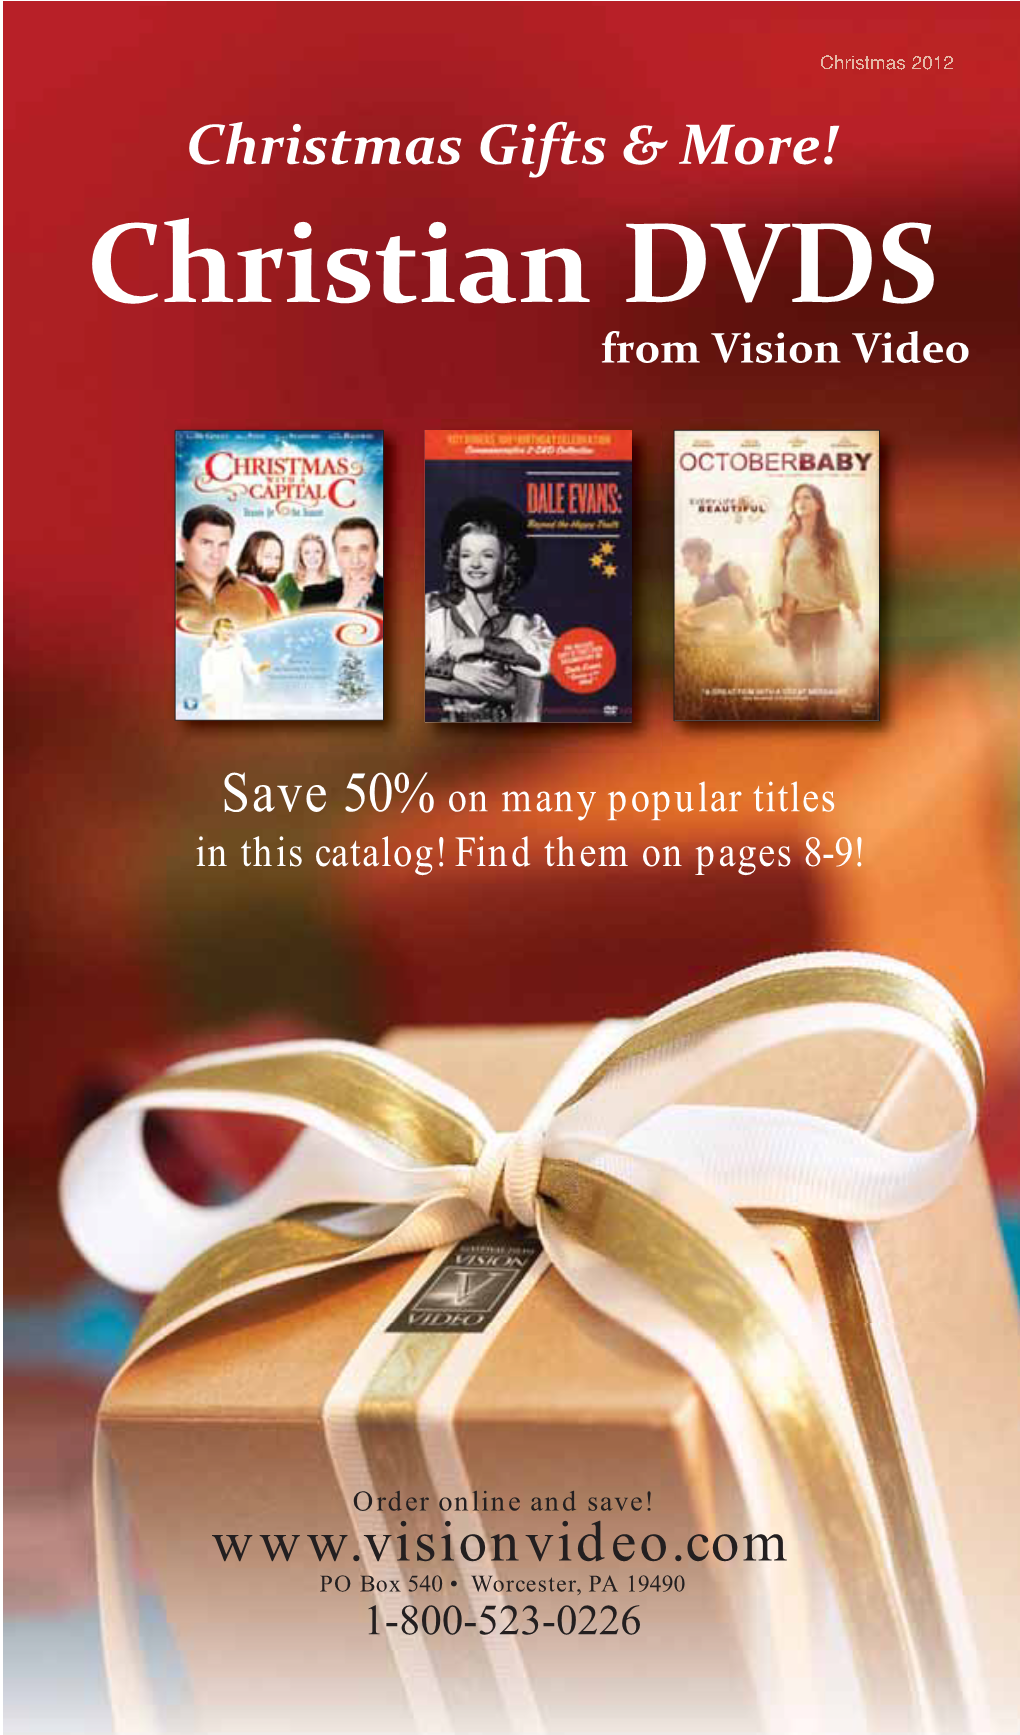 Christian DVDS from Vision Video